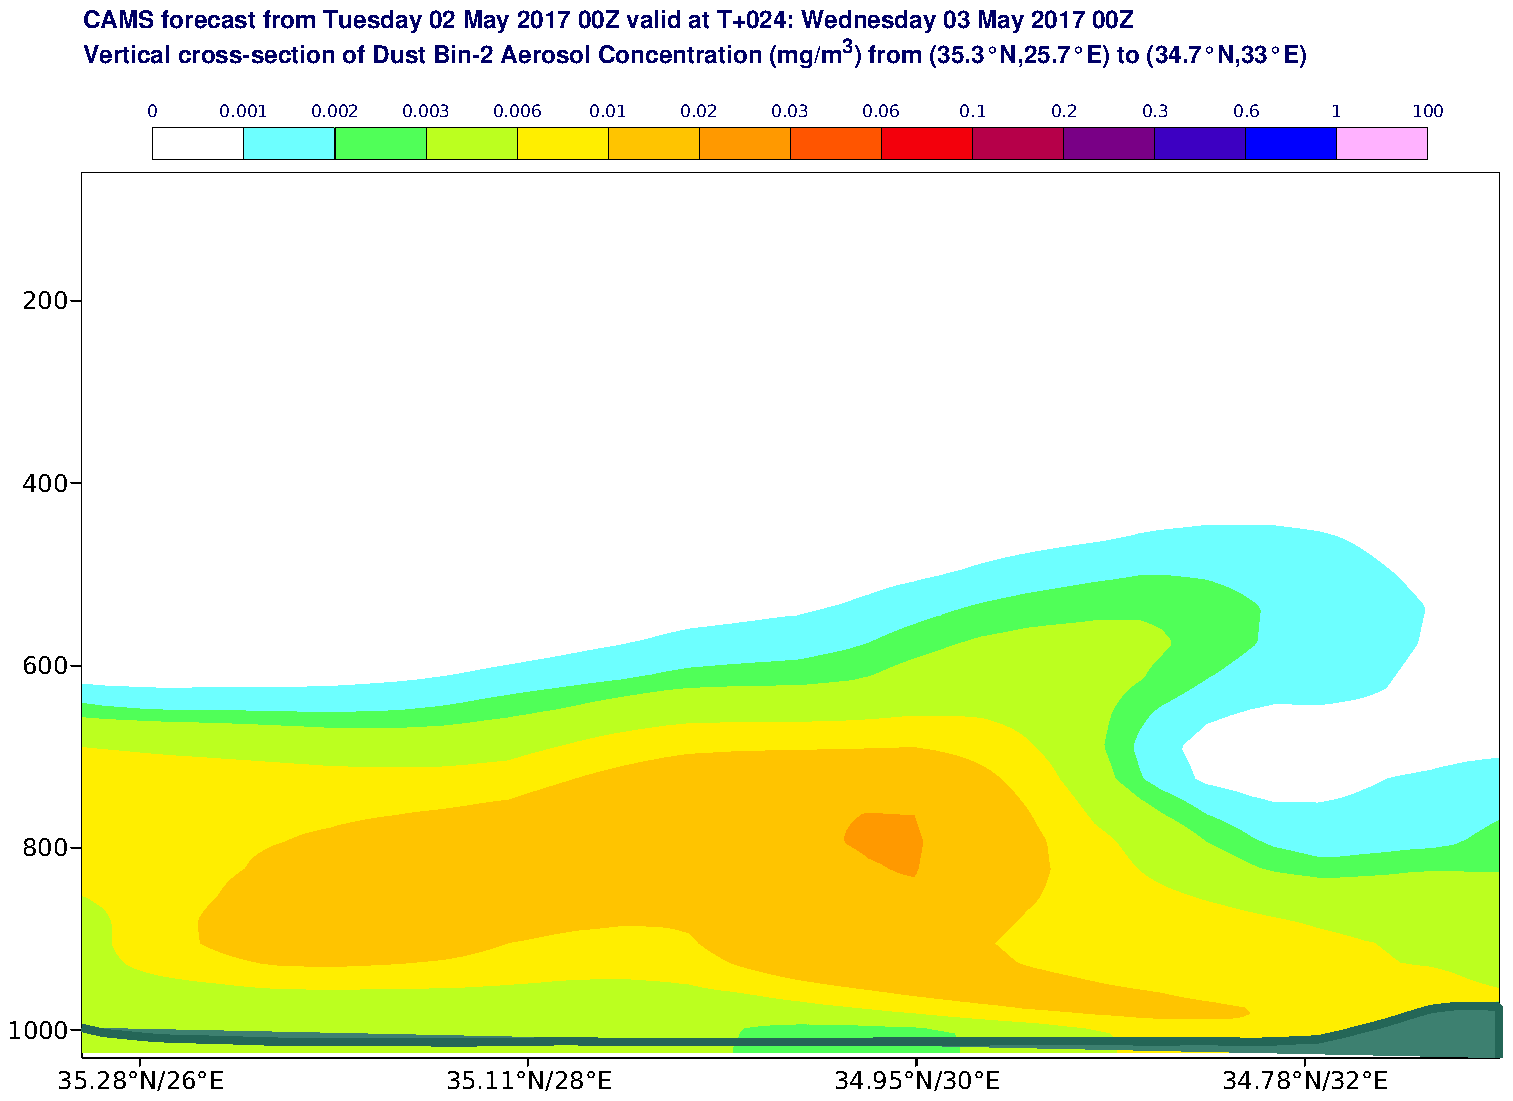 Vertical cross-section of Dust Bin-2 Aerosol Concentration (mg/m3) valid at T24 - 2017-05-03 00:00